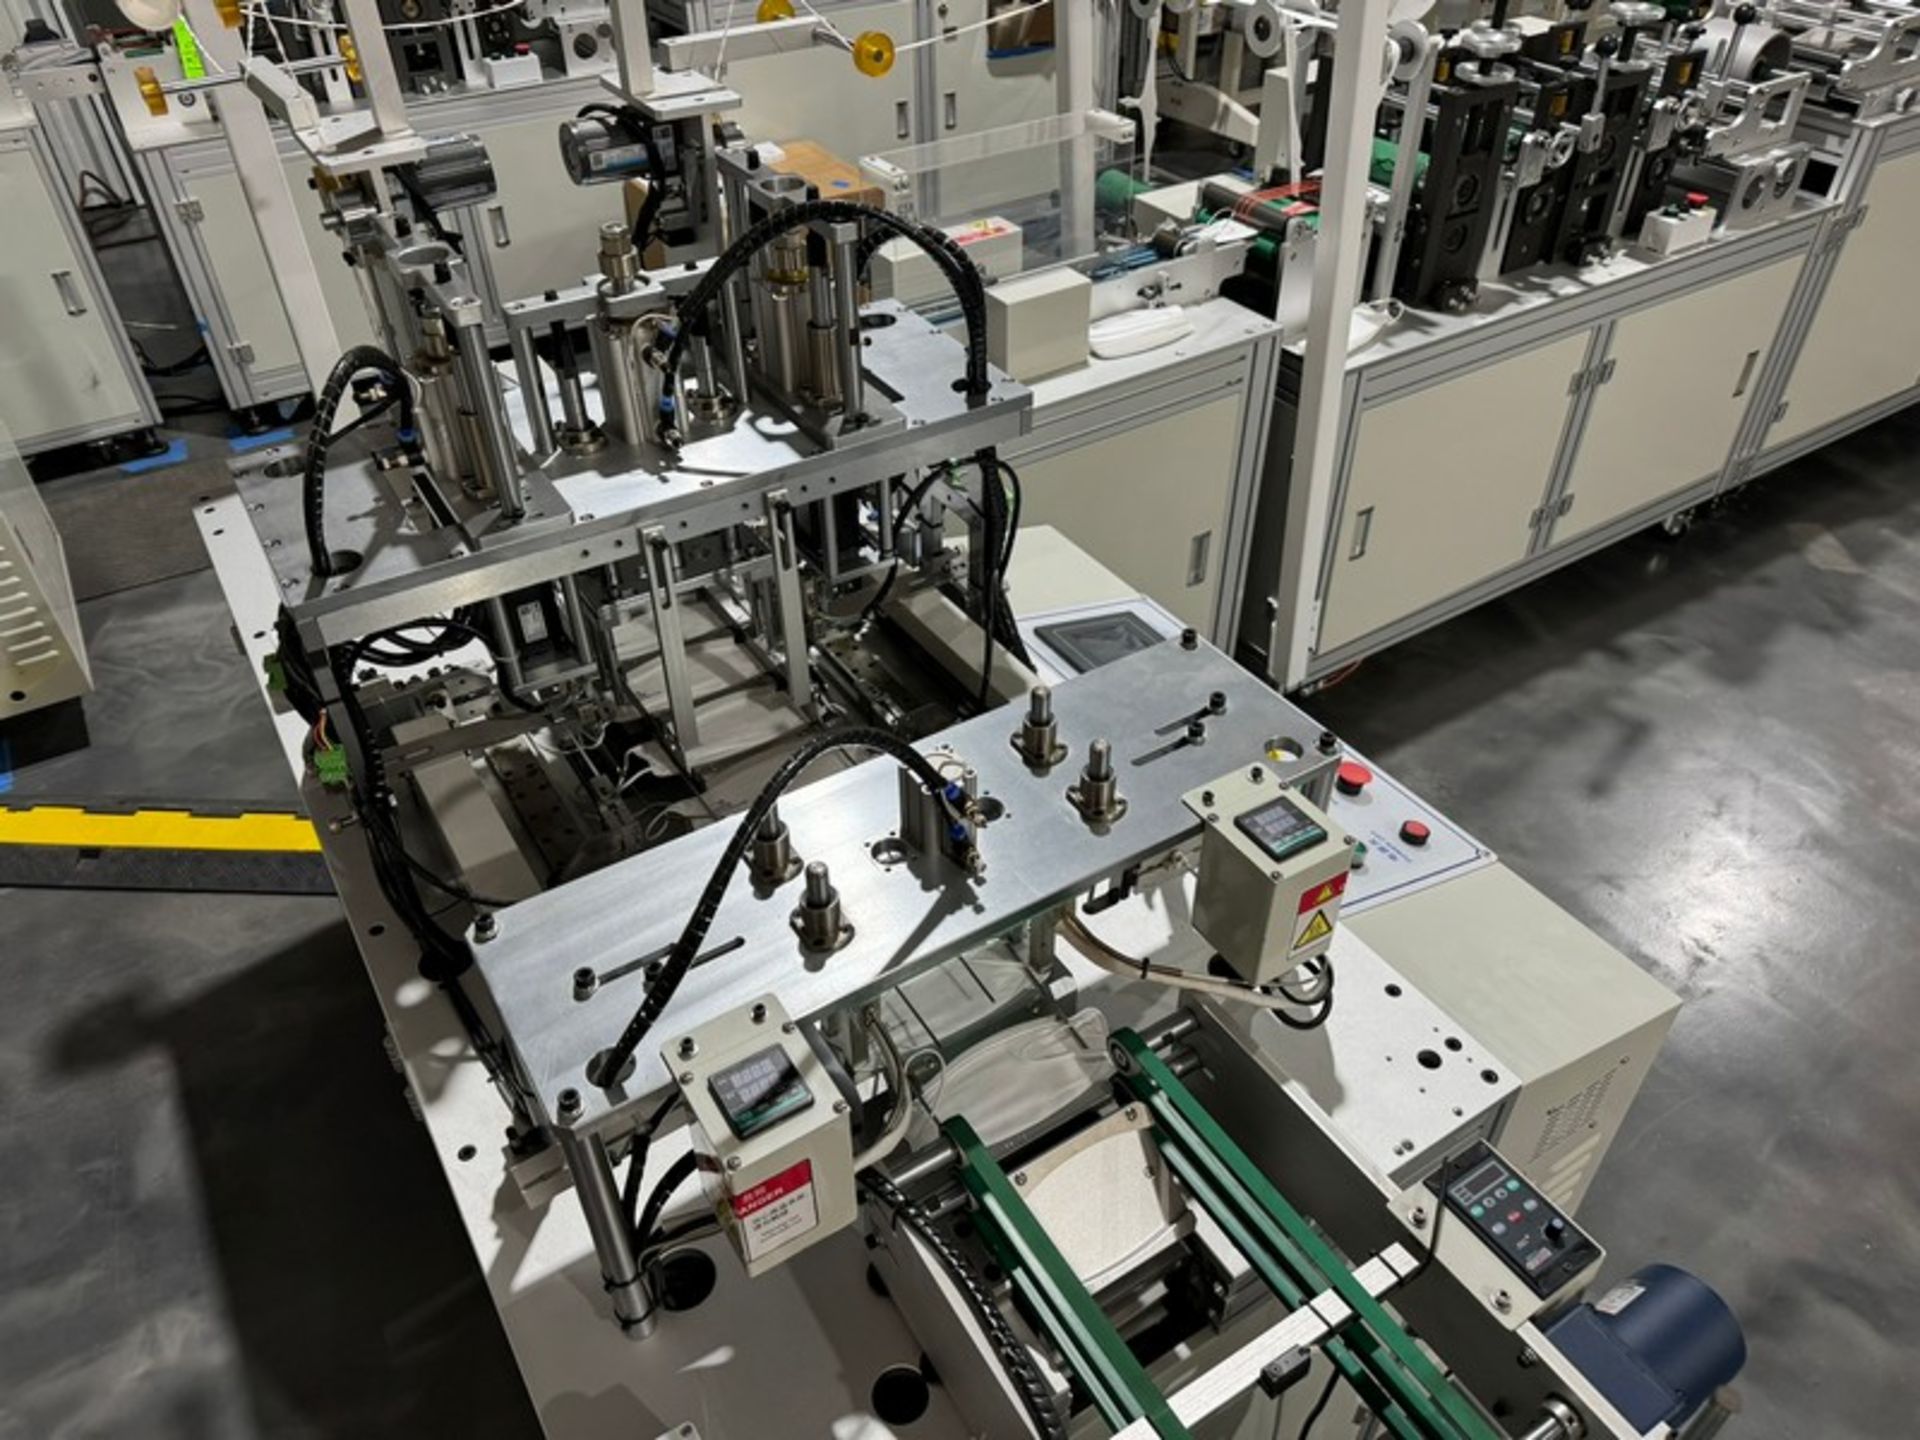 2022 KYD Automatic 6,000 Units Per Hour Mask Manufacturing Line, Includes Unwinding Station, Rolling - Image 7 of 30